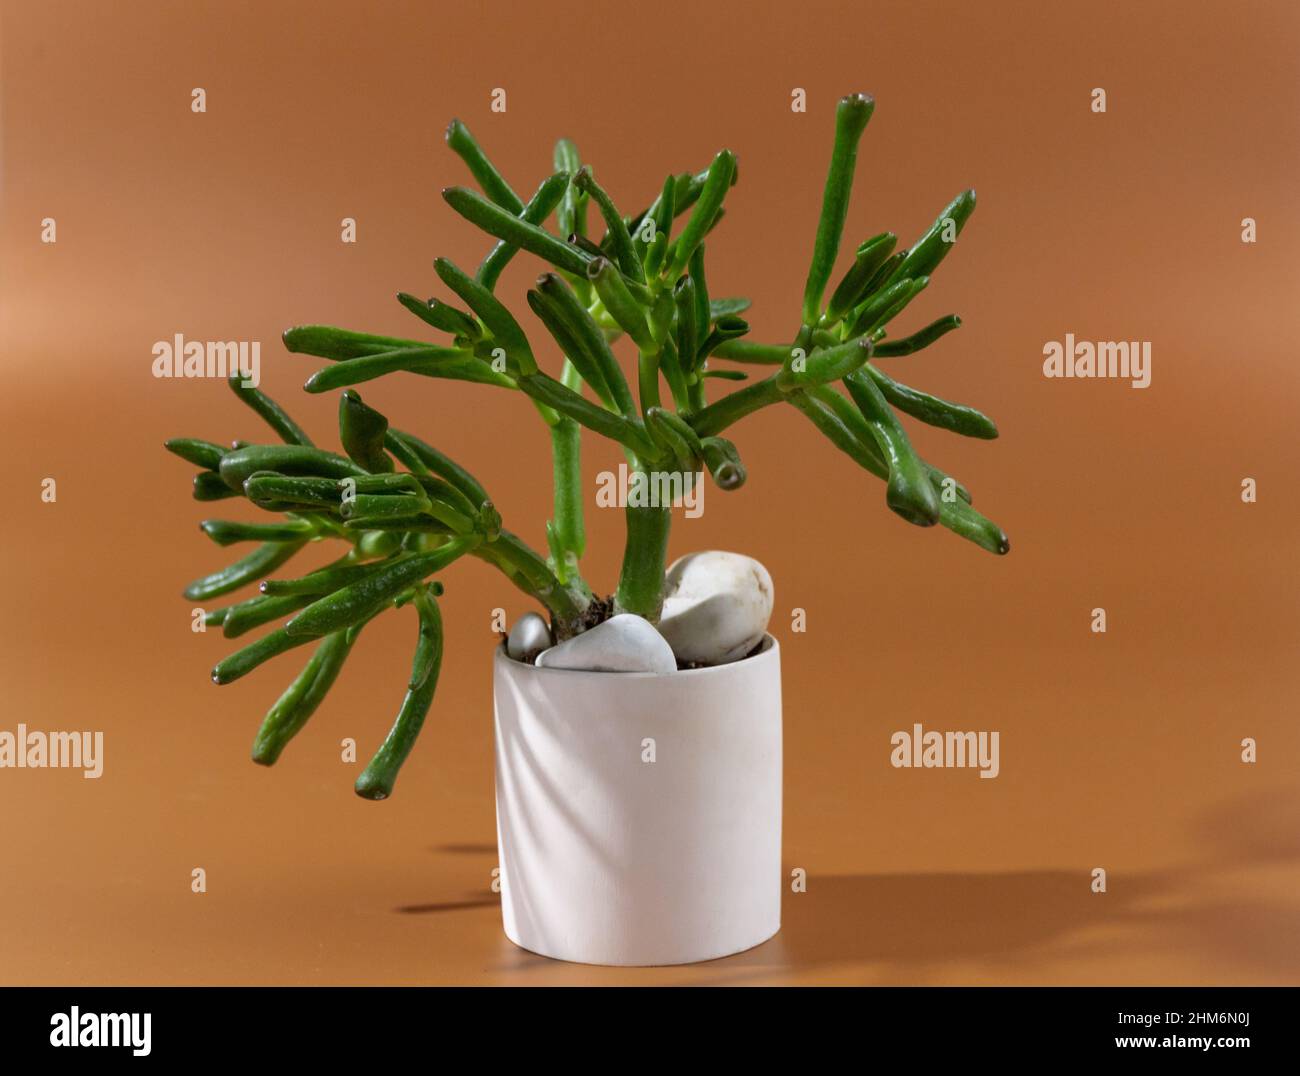 Crassula succulent plant in a white pot on brown background. Indoor gardening, houseplant care Stock Photo